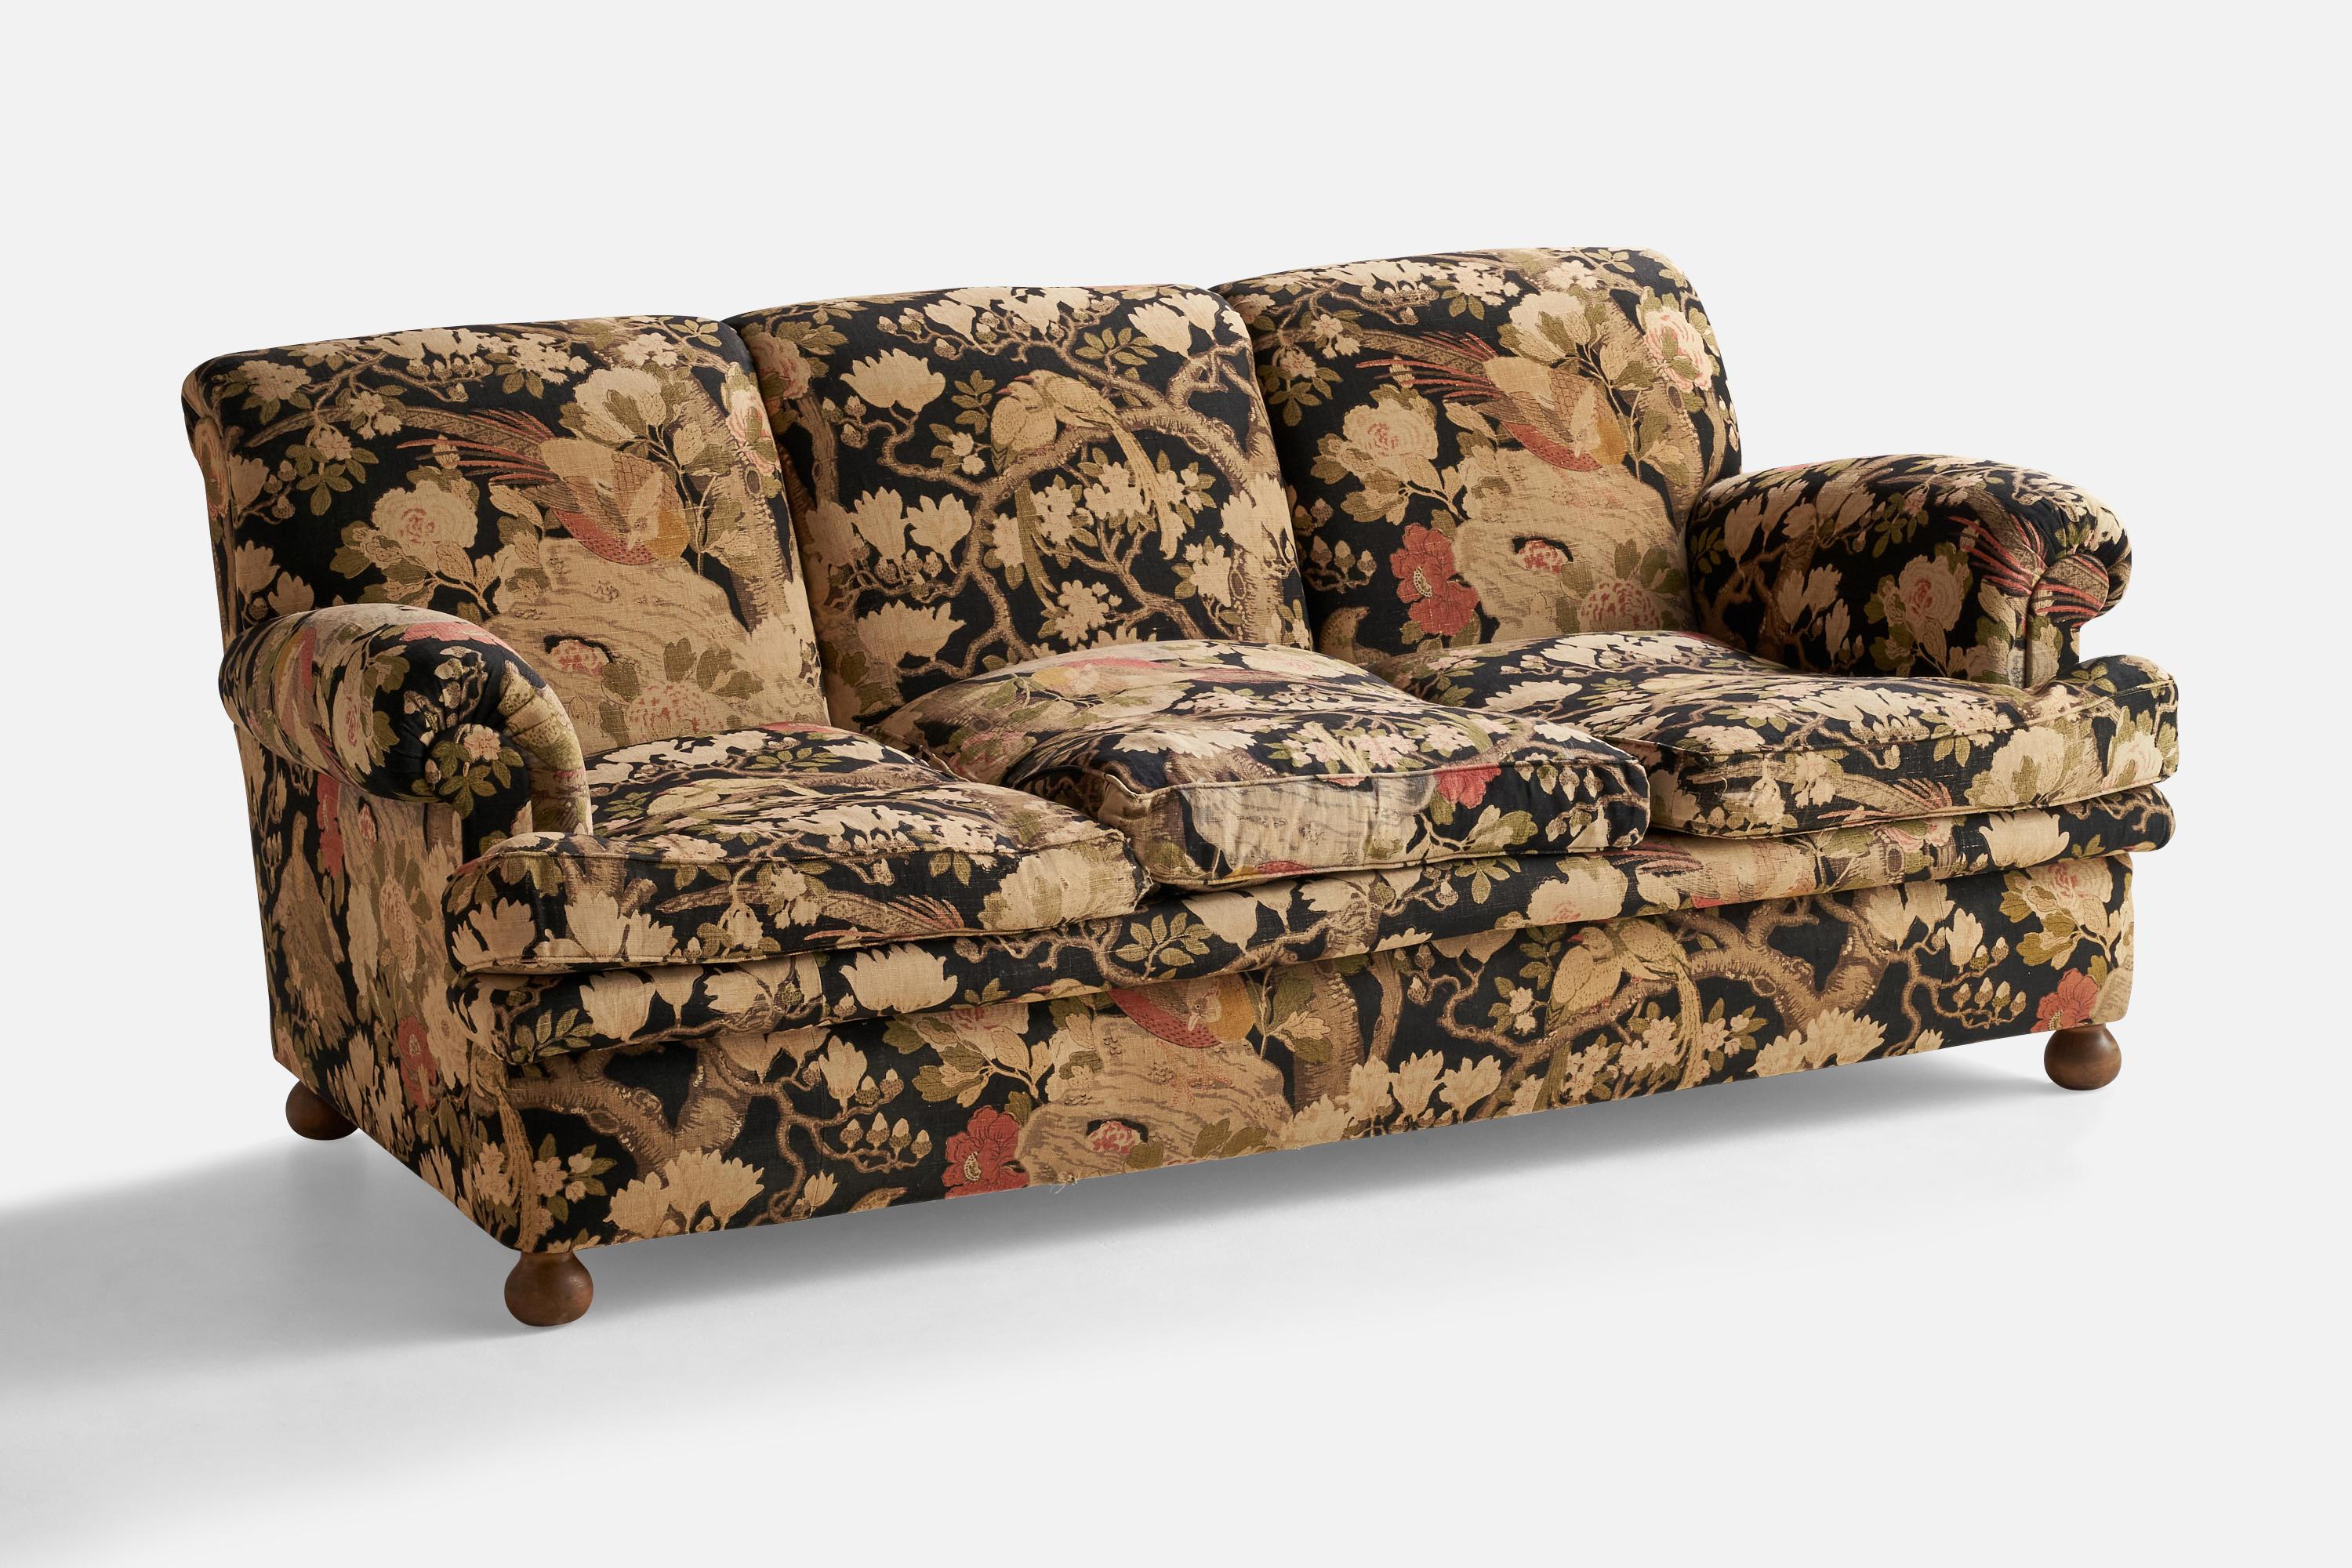 An earl mahogany and floral fabric sofa, Model 703, designed by Josef Frank and produced by Svenskt Tenn, Sweden, 1940s.

Seat height: 17.5”
